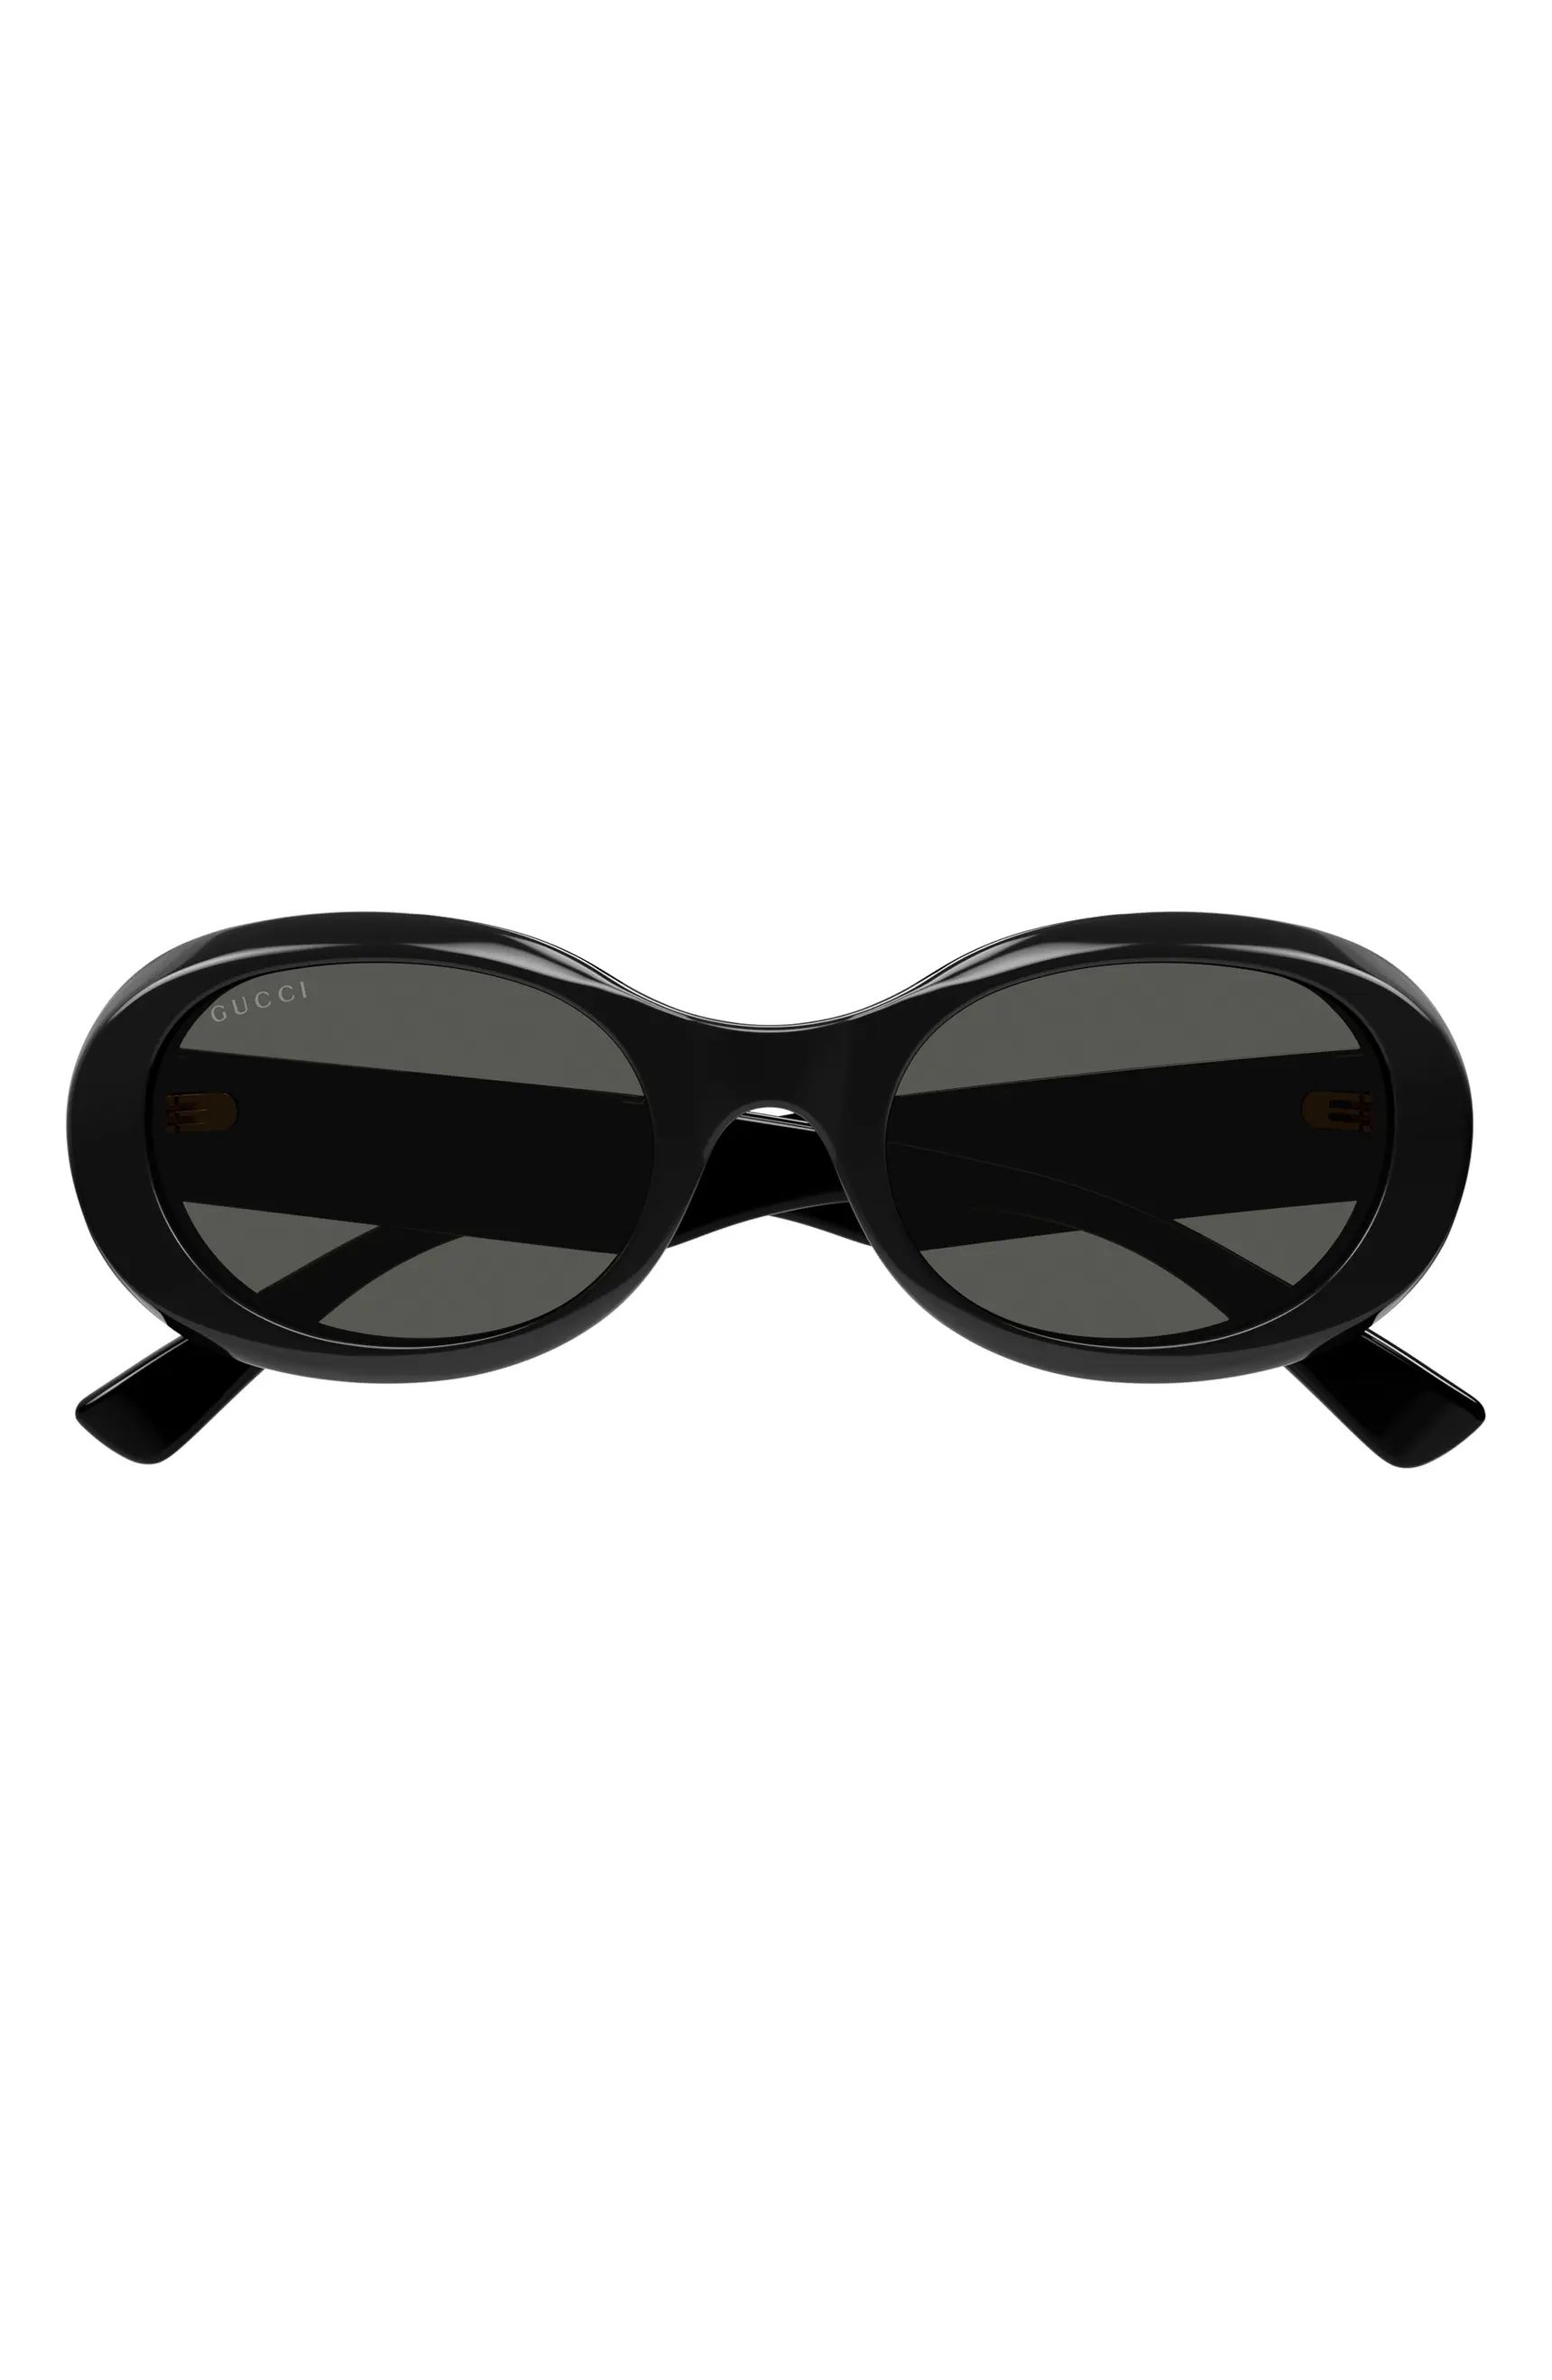 Gucci 52mm Oval Sunglasses | Nordstrom | Nordstrom